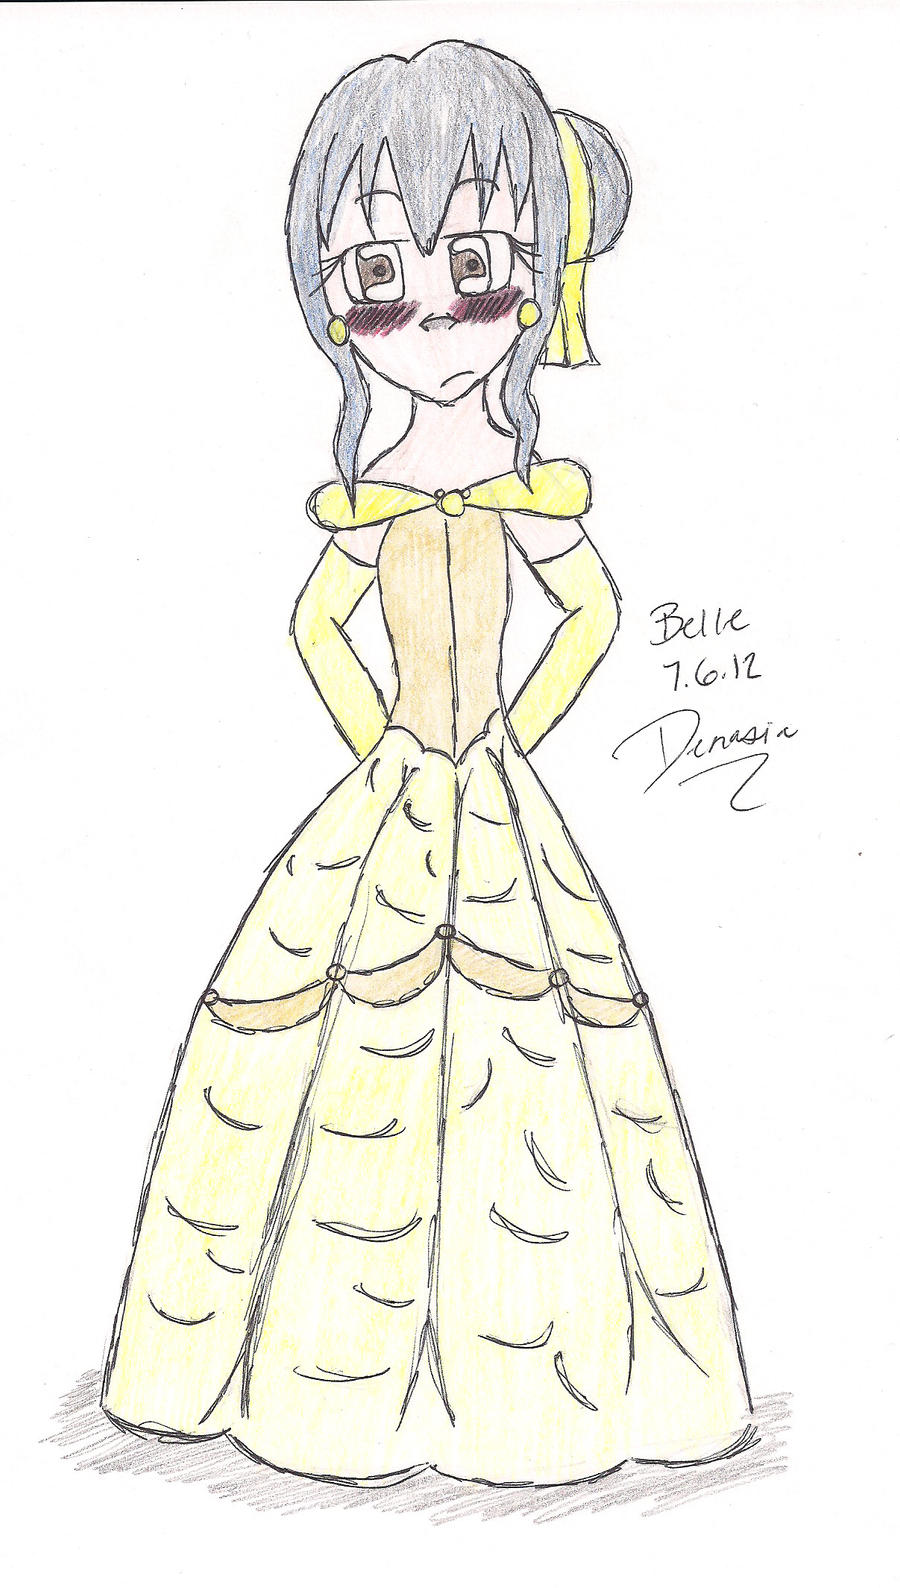 Levy as Belle